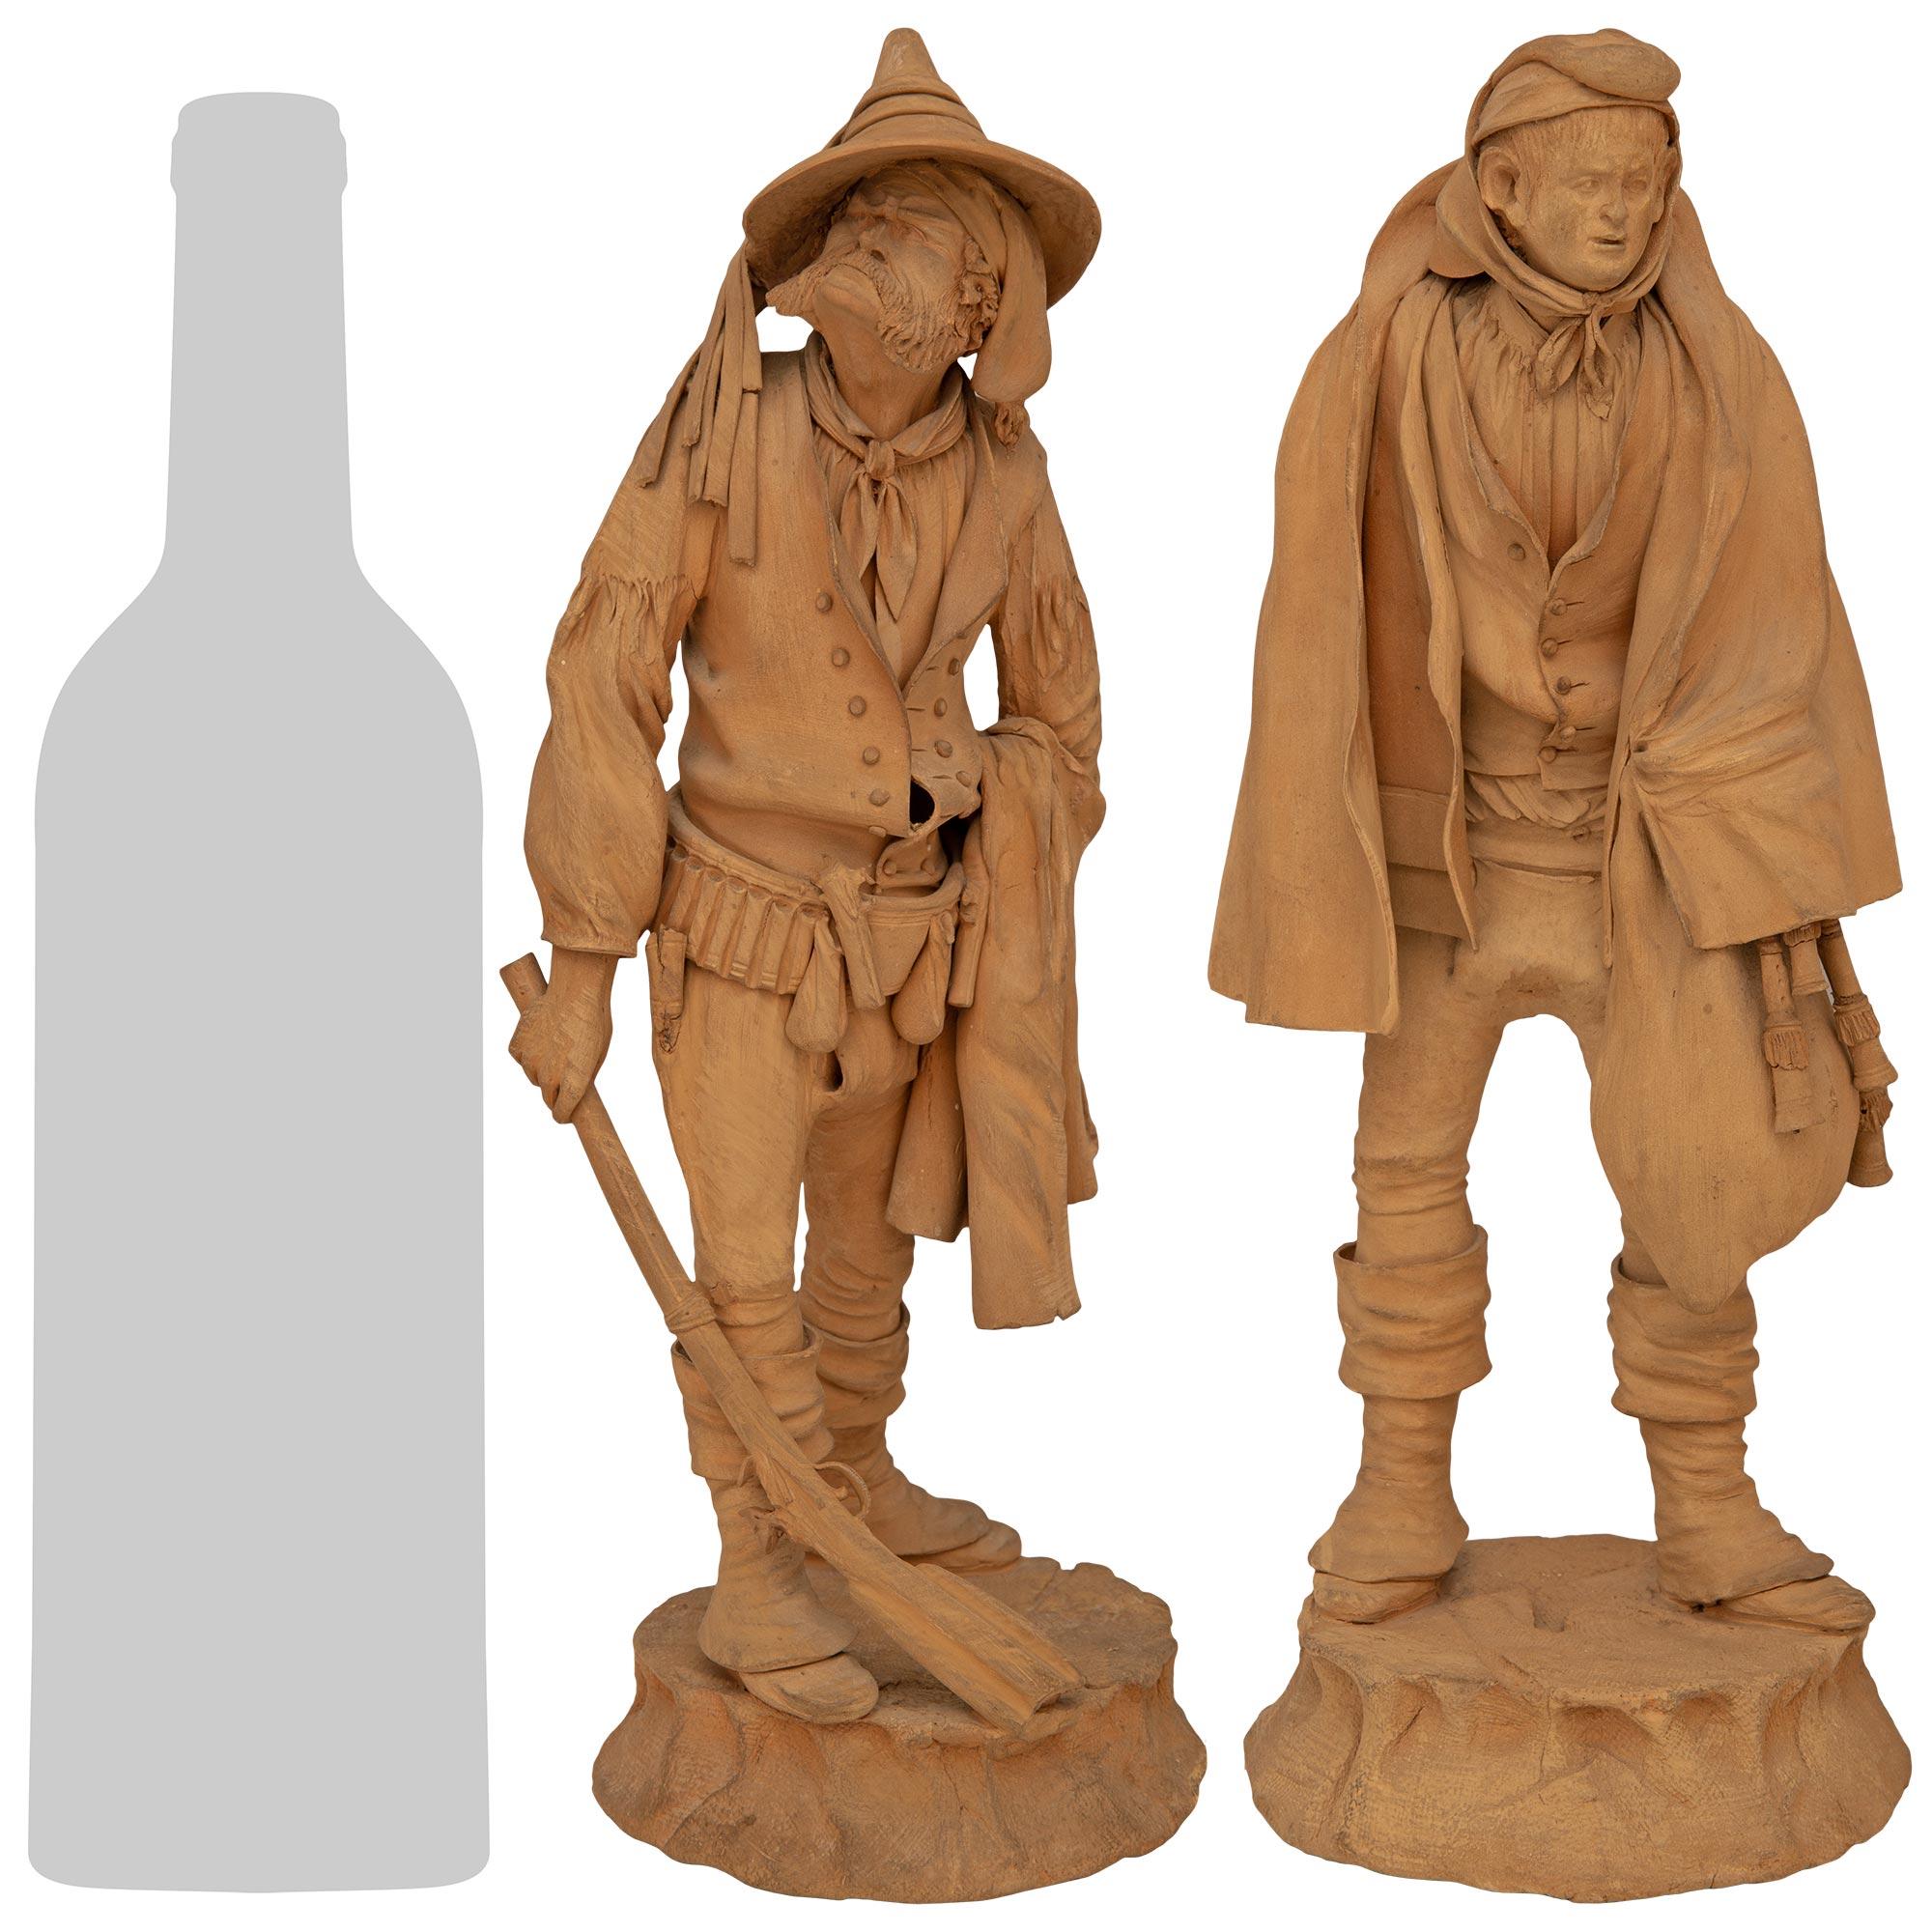 A sensational set of four Italian 19th century Terra Cotta statues. Each of the four wonderful statues showcases a man wearing period attire and seemingly caught in a pose while performing a particular task of the day, while all being raised on a